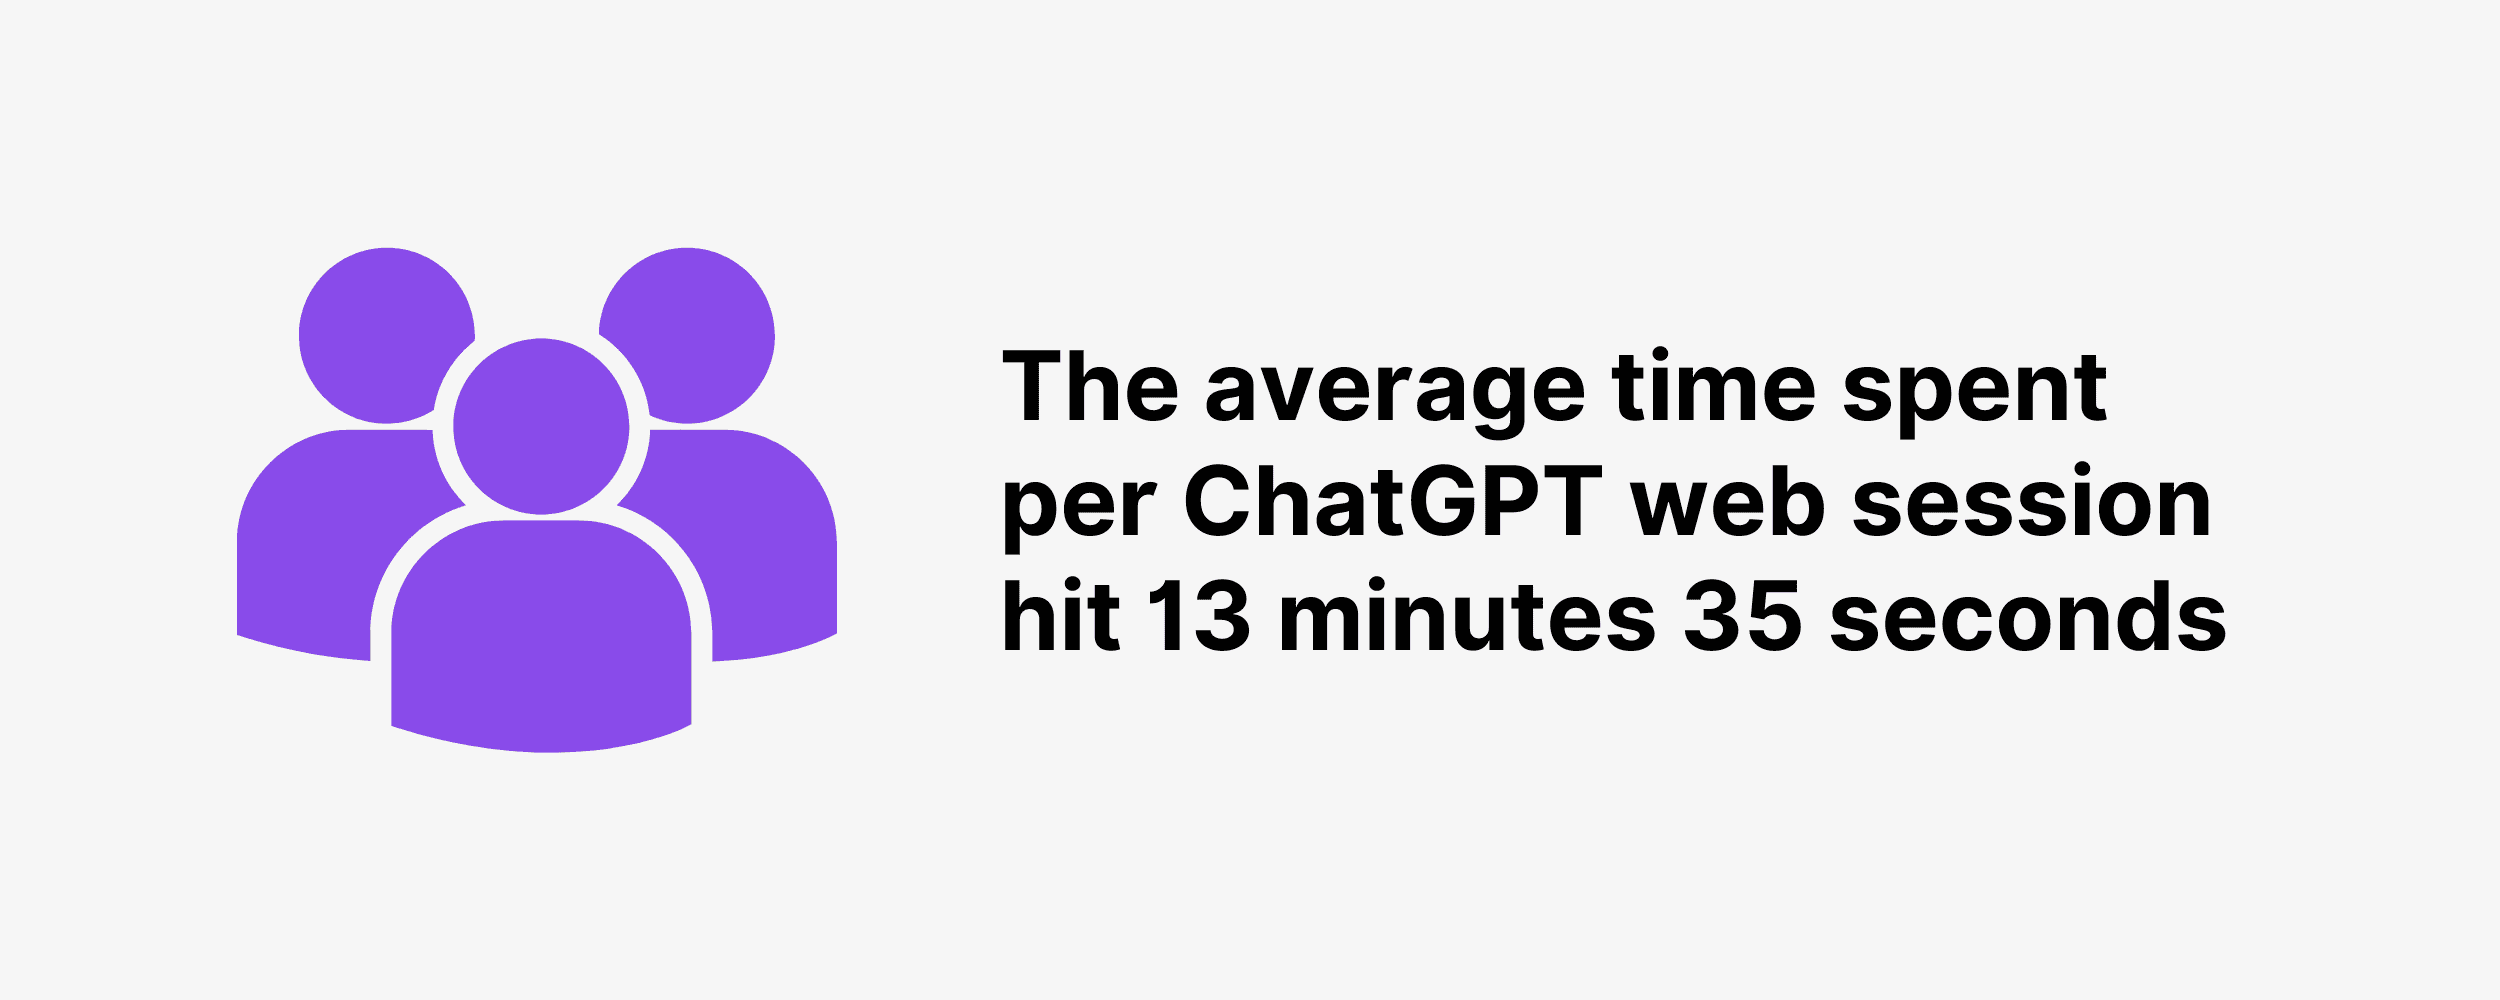 The average time spent per ChatGPT web session hit 13 minutes 35 seconds